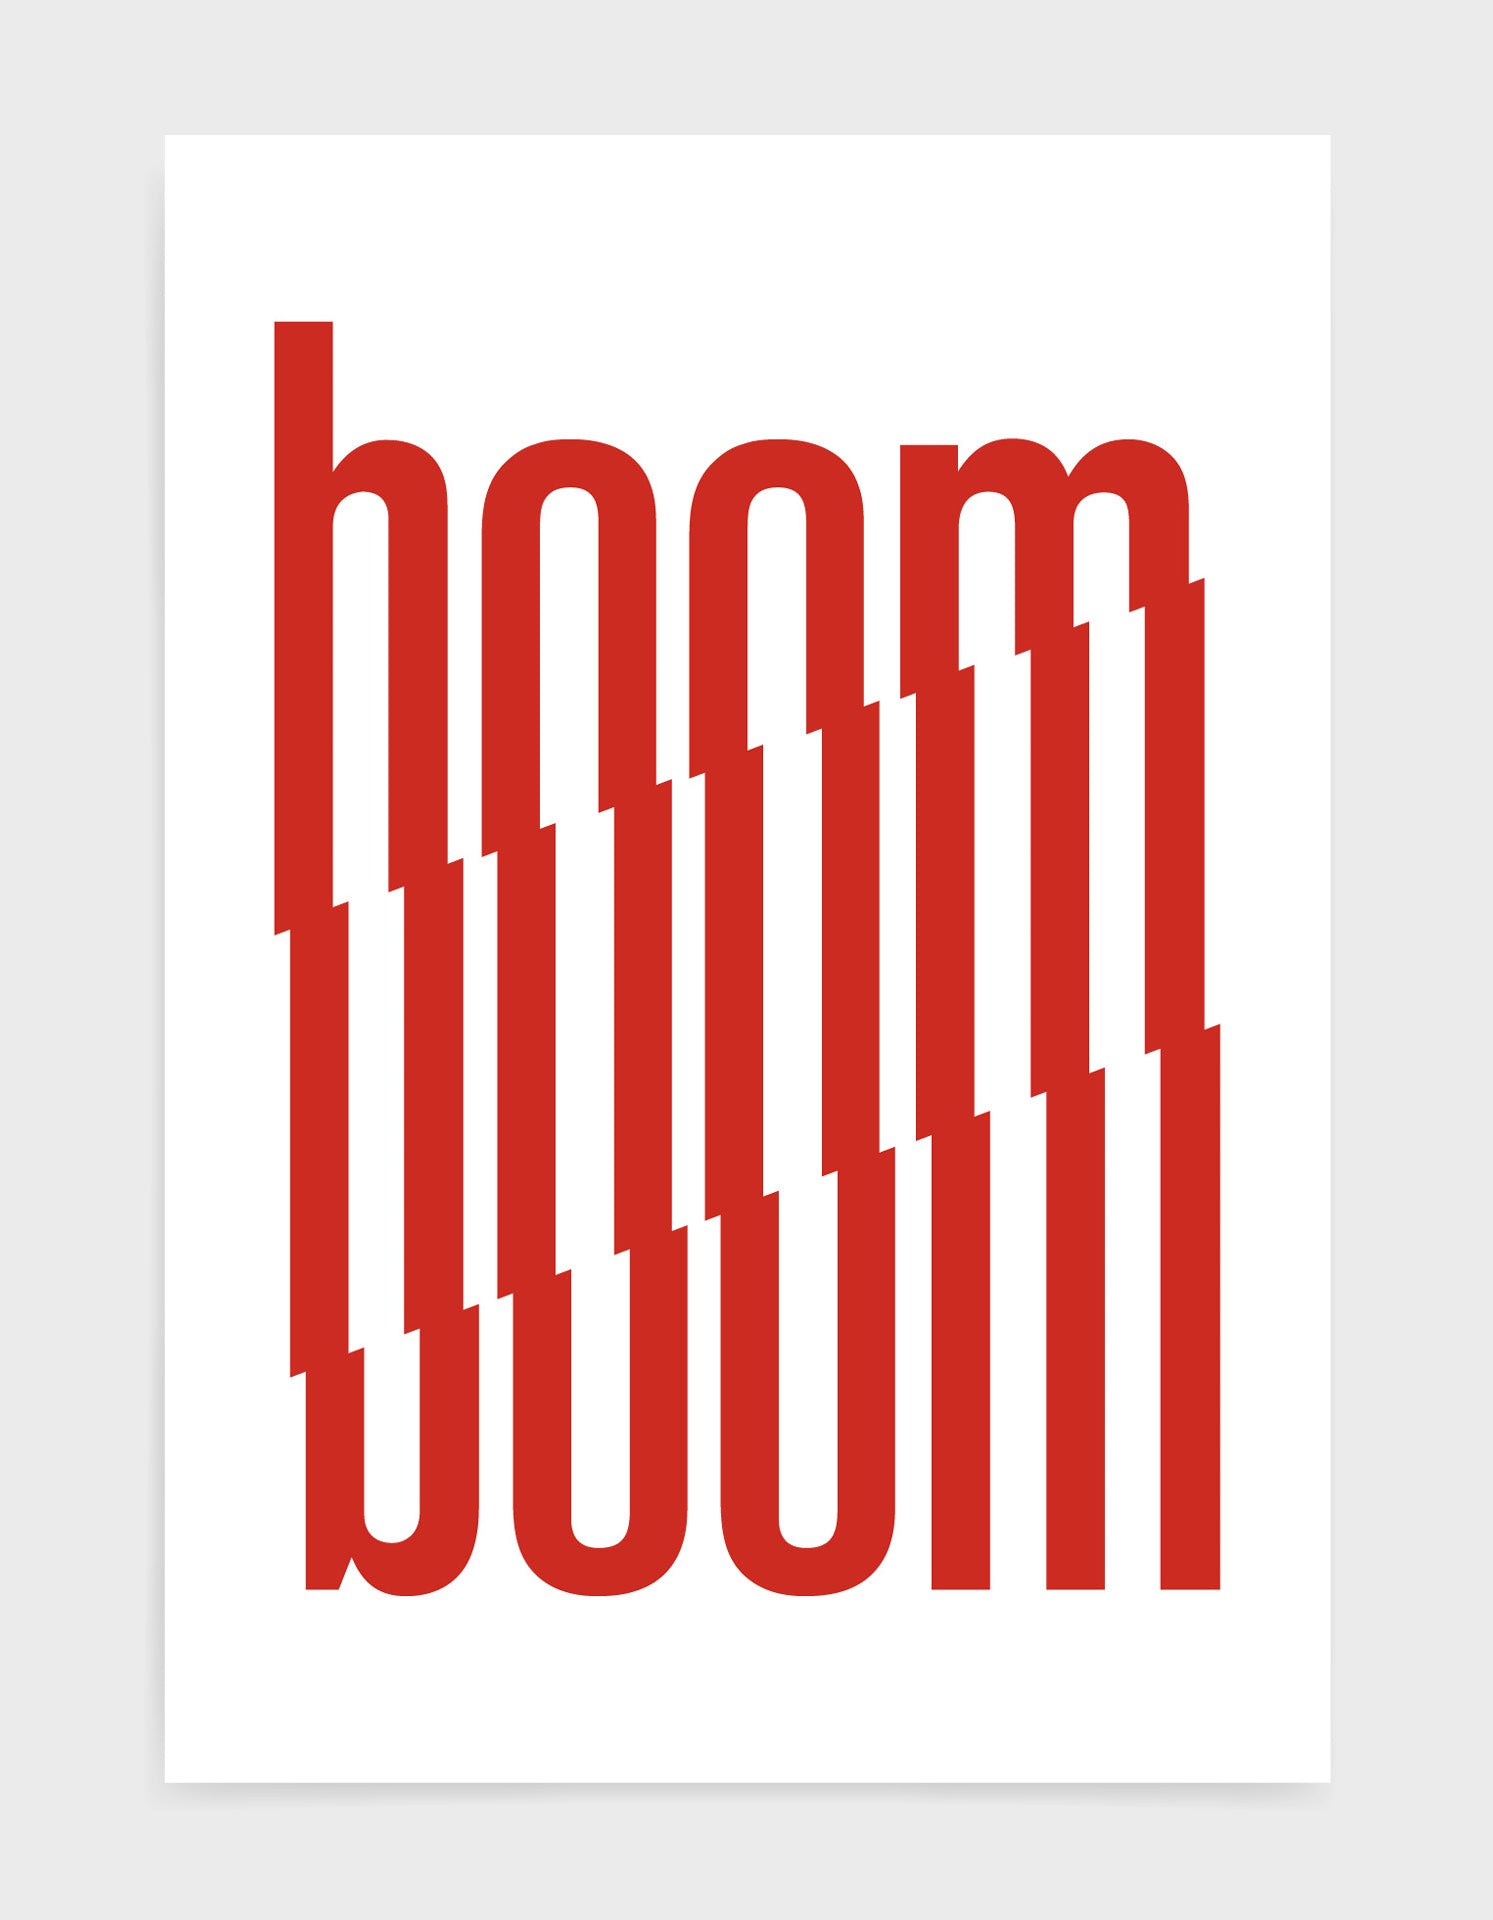 typography art print of the word boom in red text against a white background